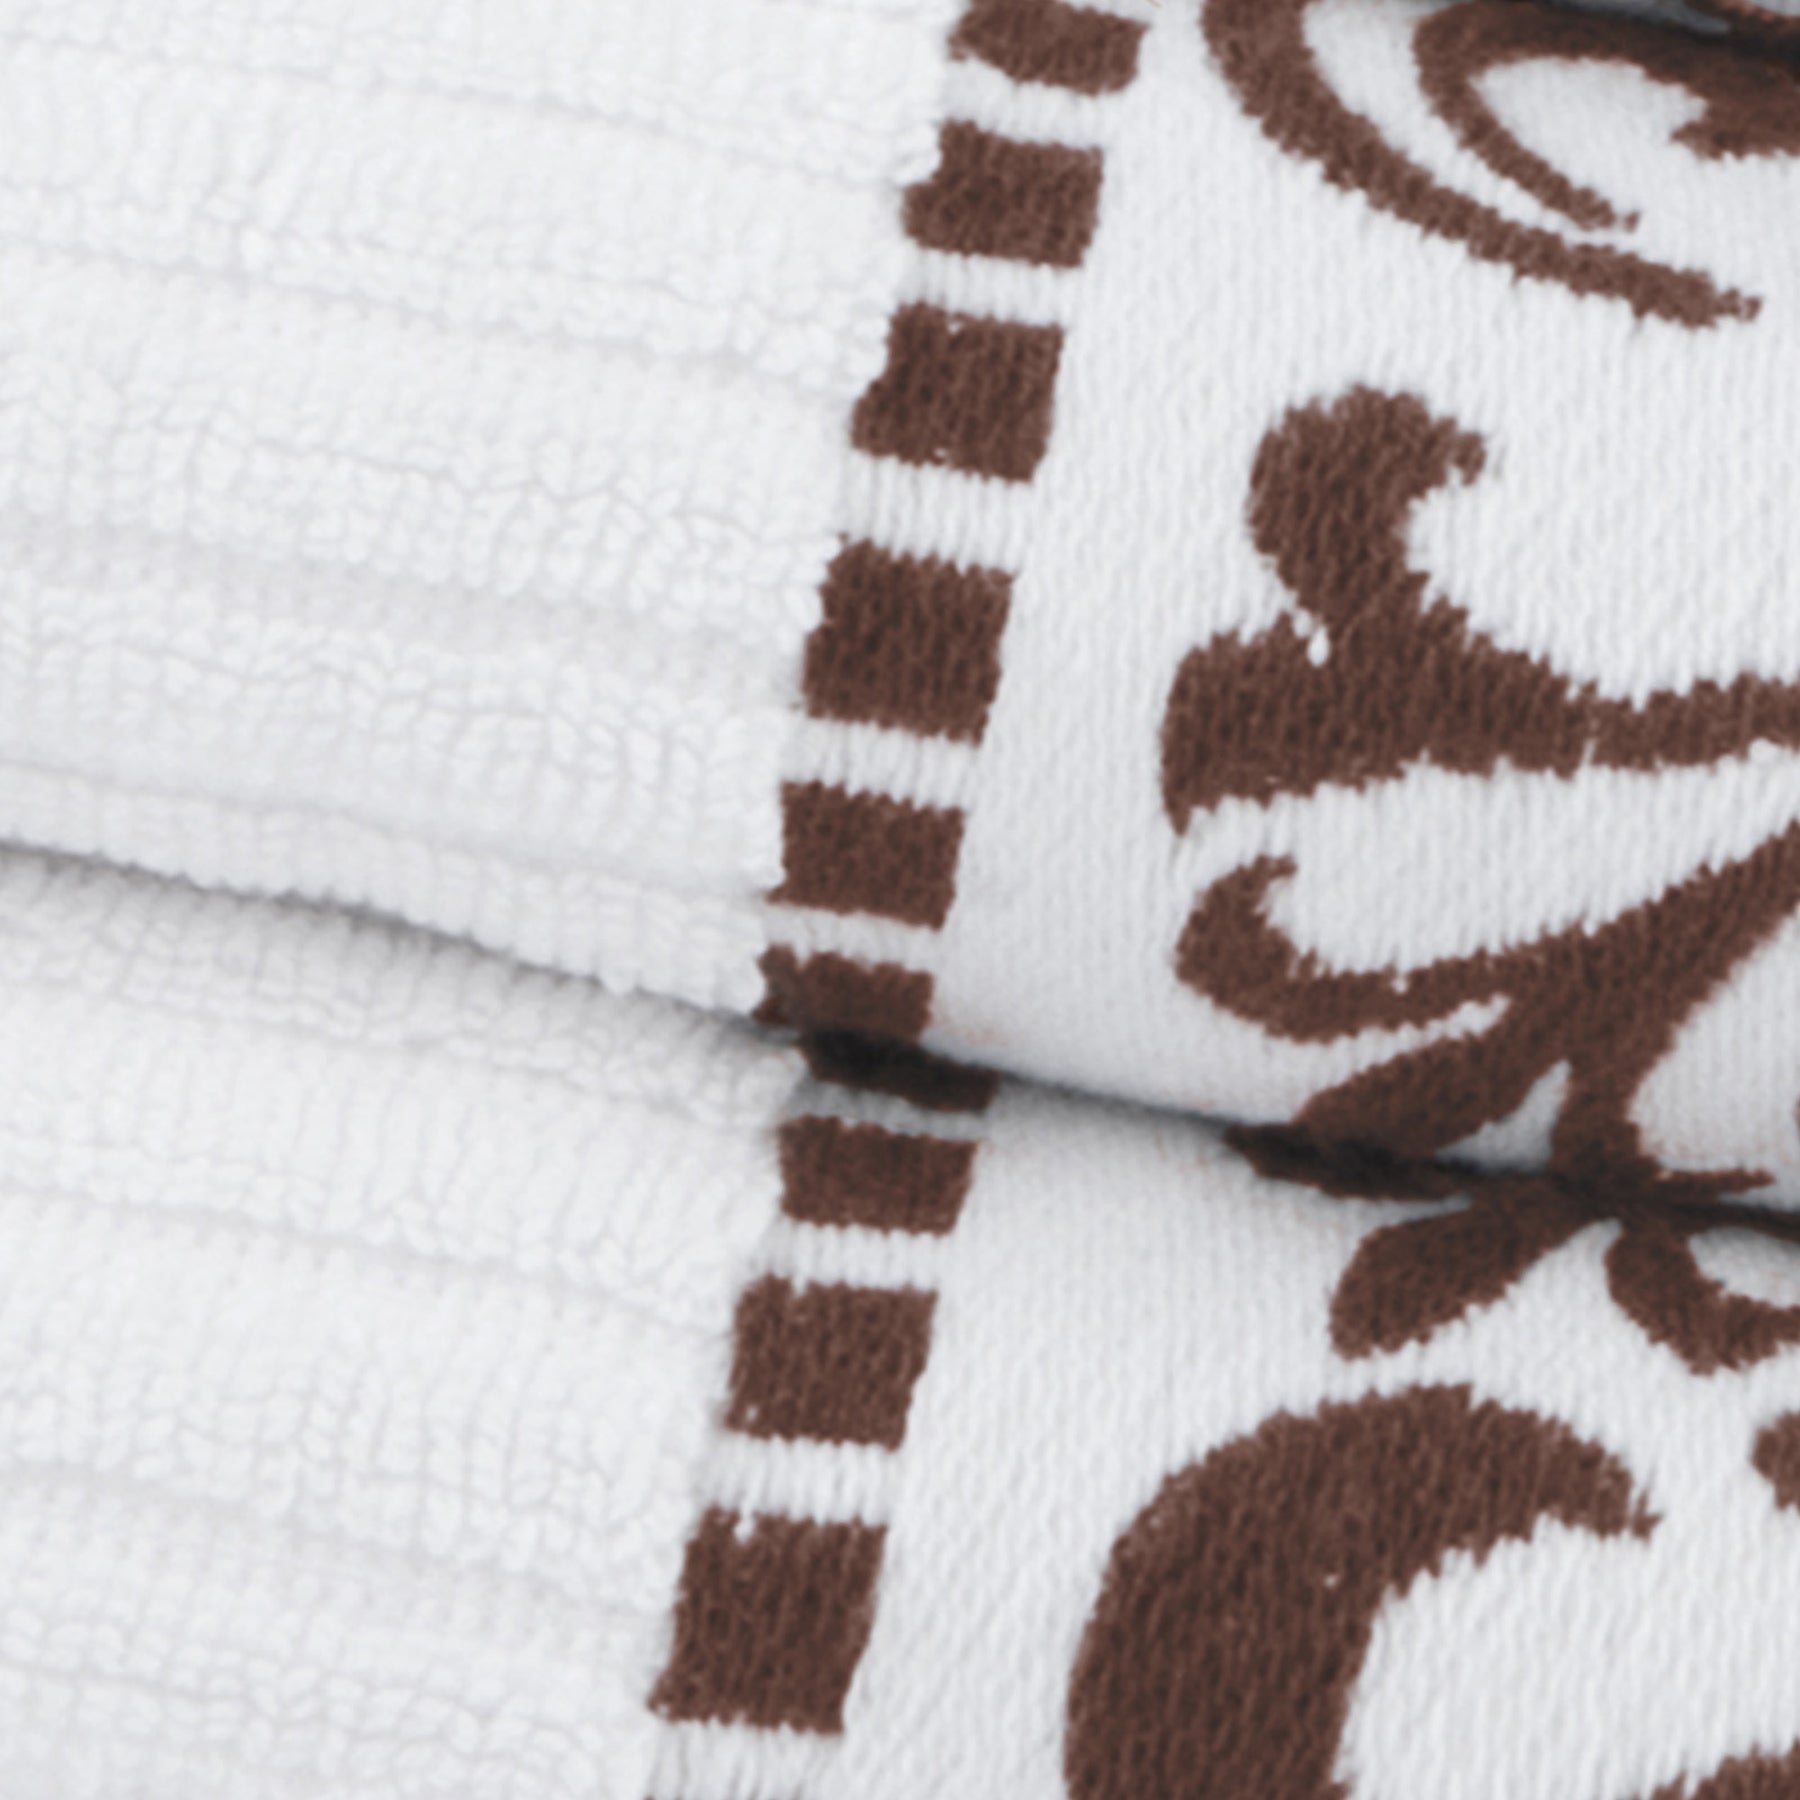 Superior Athens Cotton 6-Piece Assorted Towel Set with Greek Scroll and Floral Pattern -Chocolate